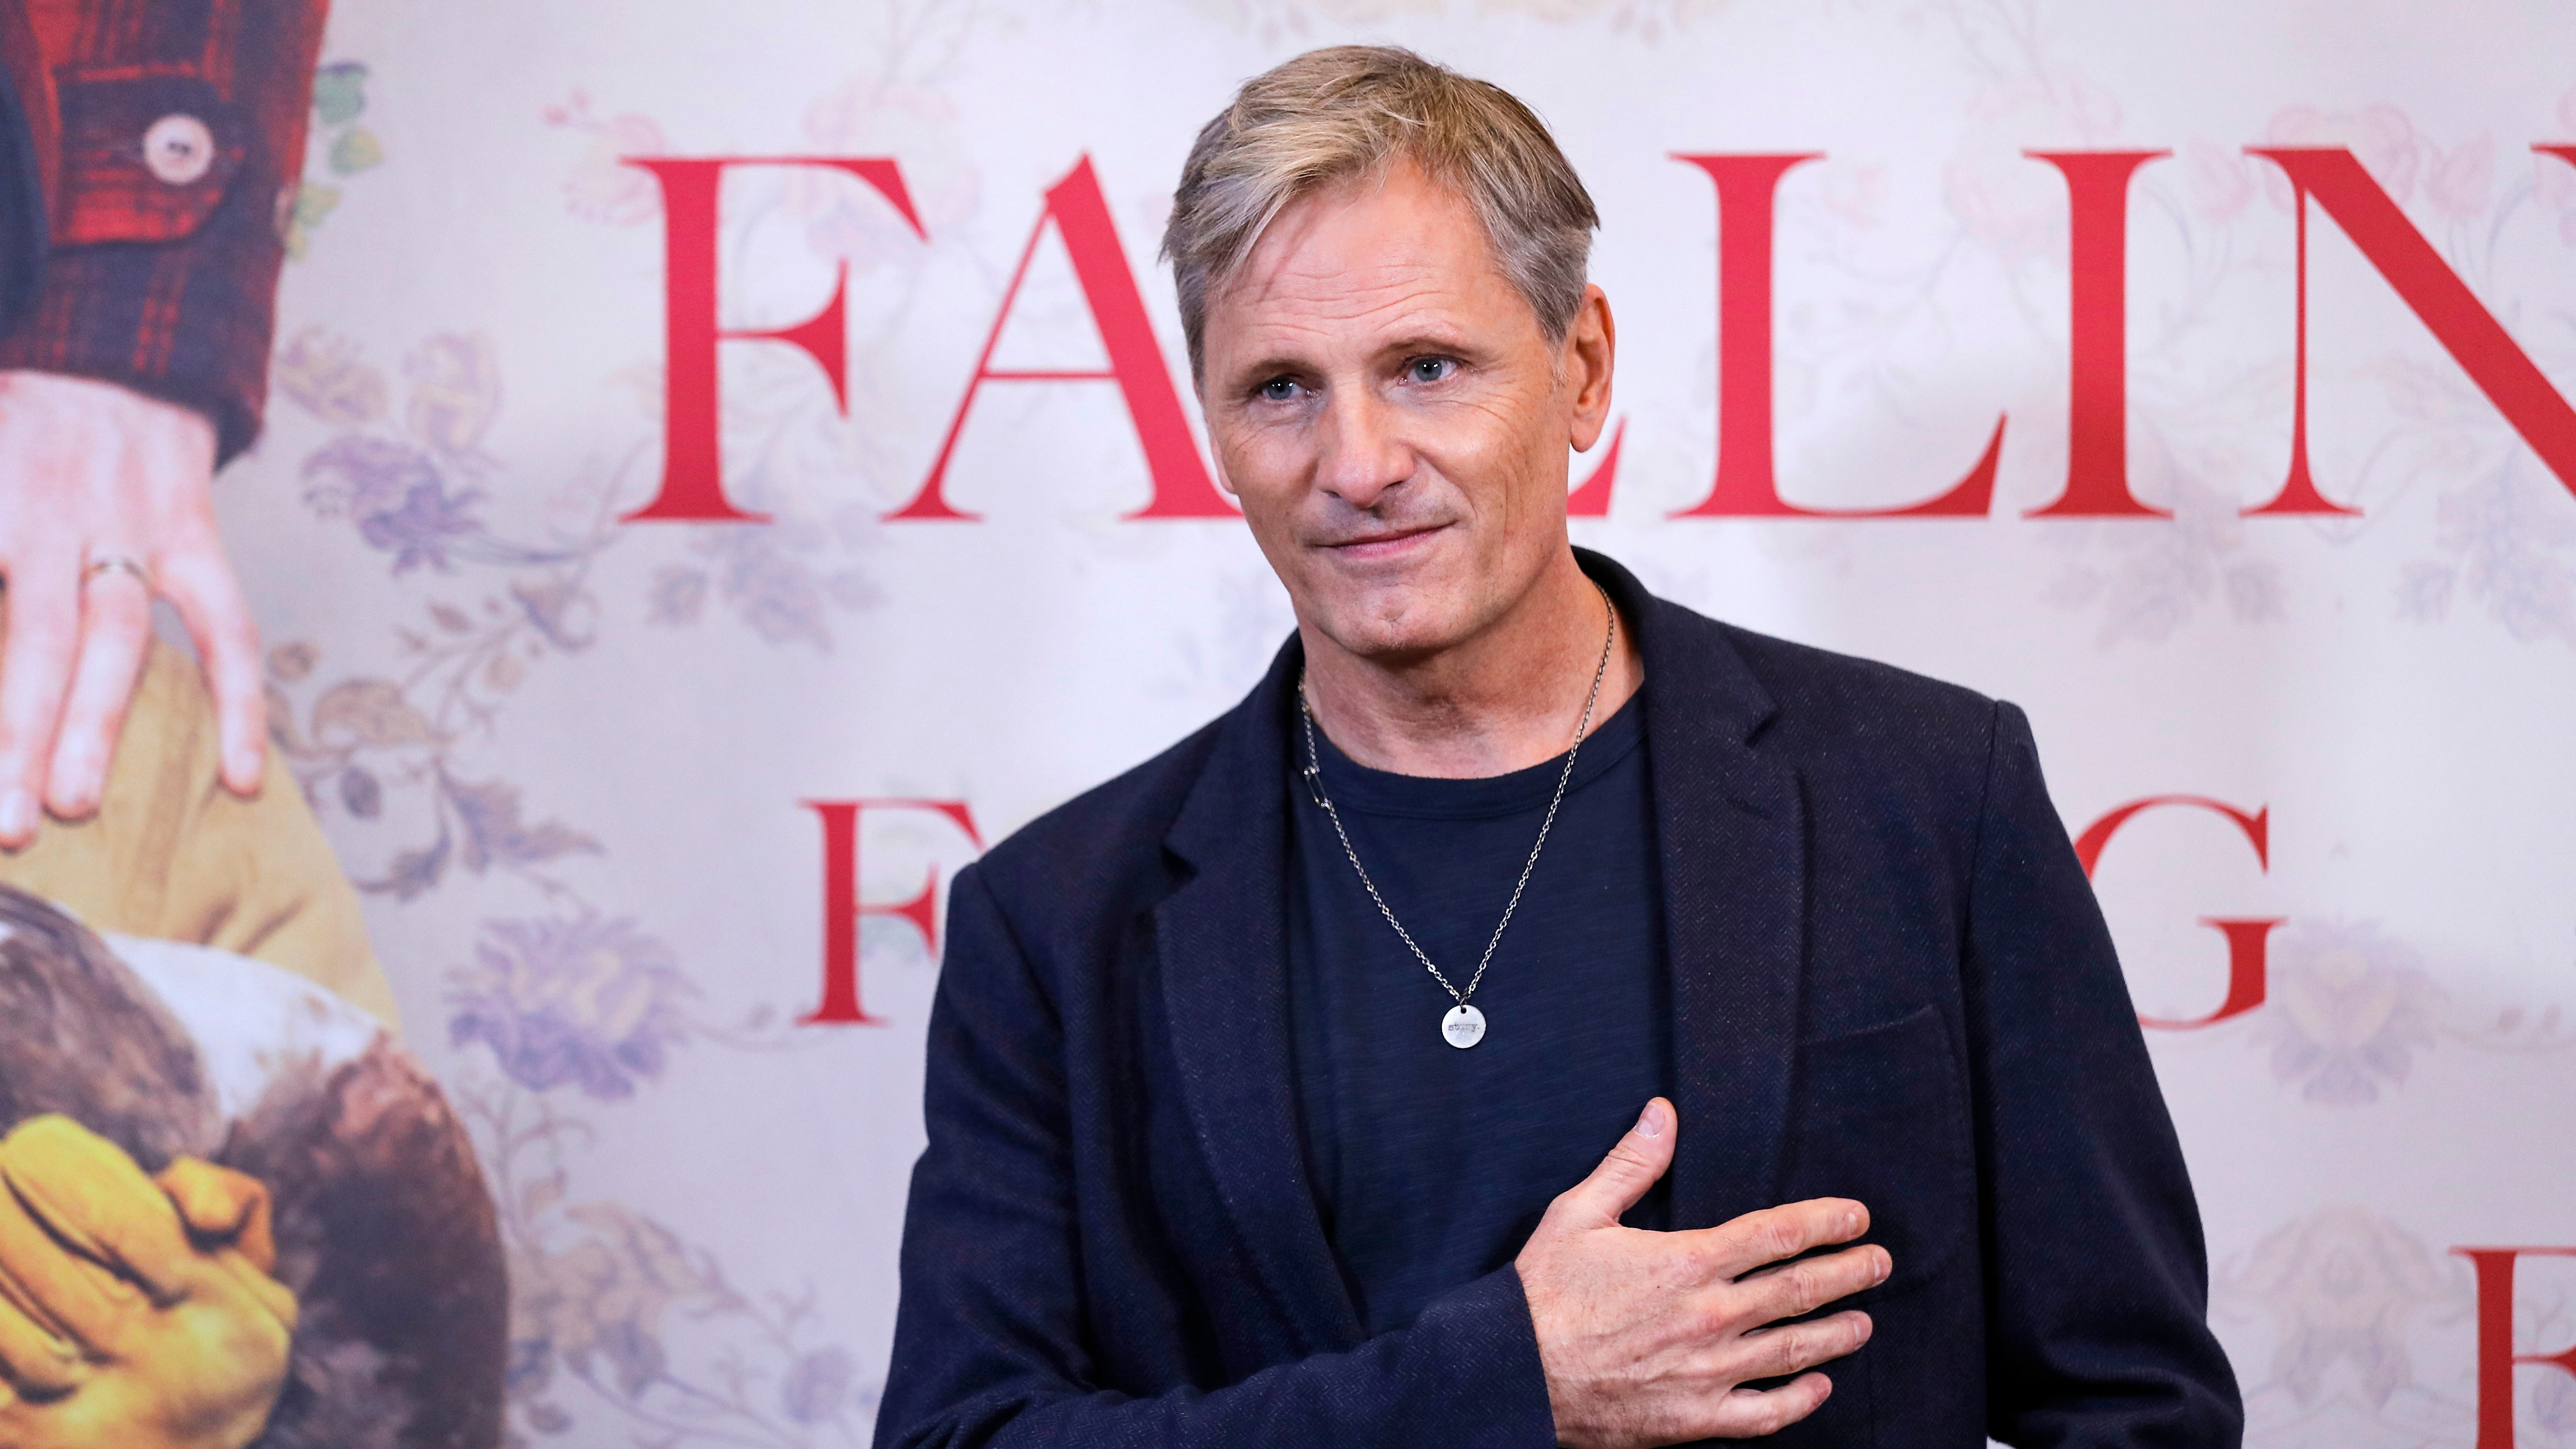 The real-life tragedies of ‘Falling’ star Viggo Mortensen inspired a new film about dementia